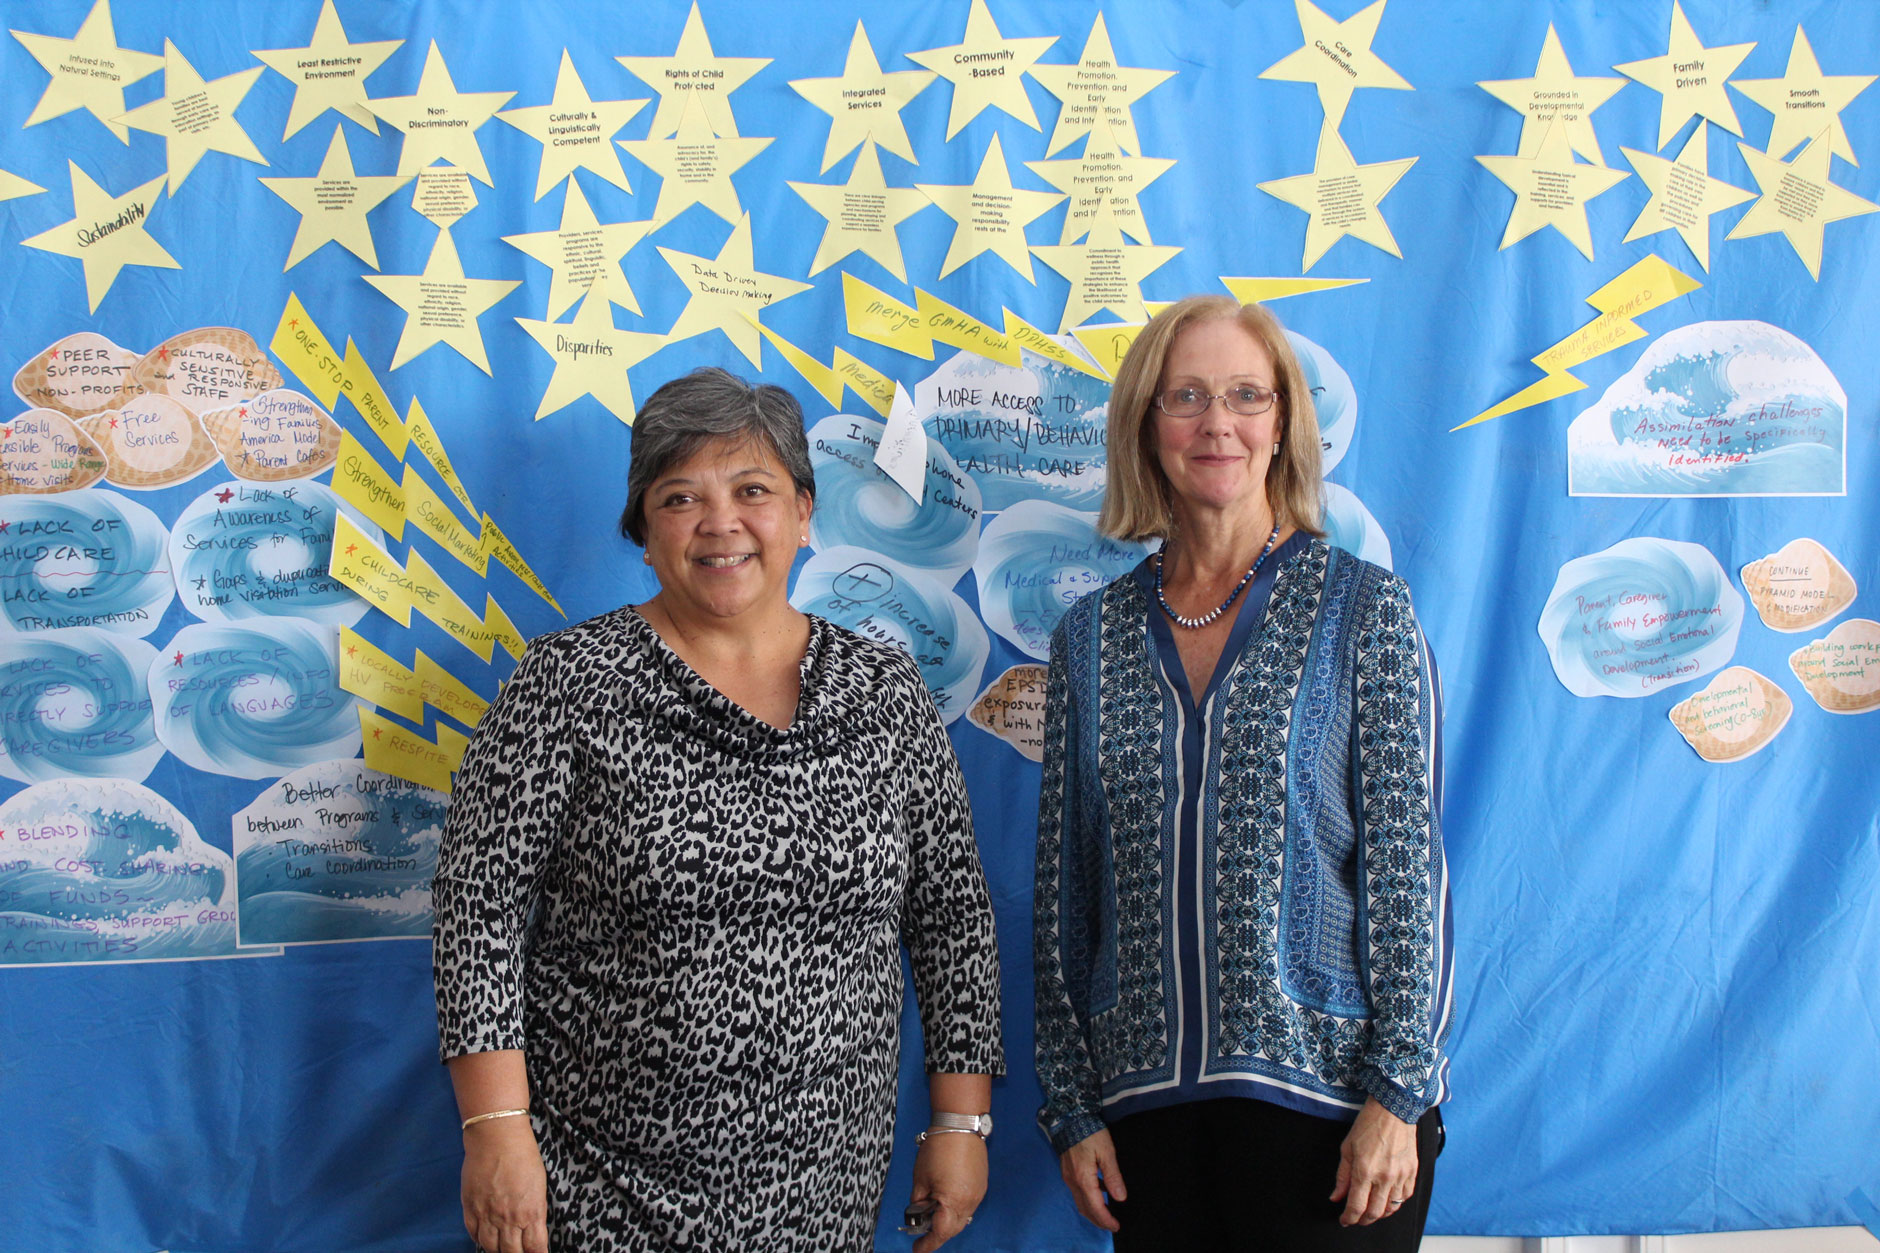 Two individuals standing in front of chart with many paper stars, paper lightning bolts, and paper storms.